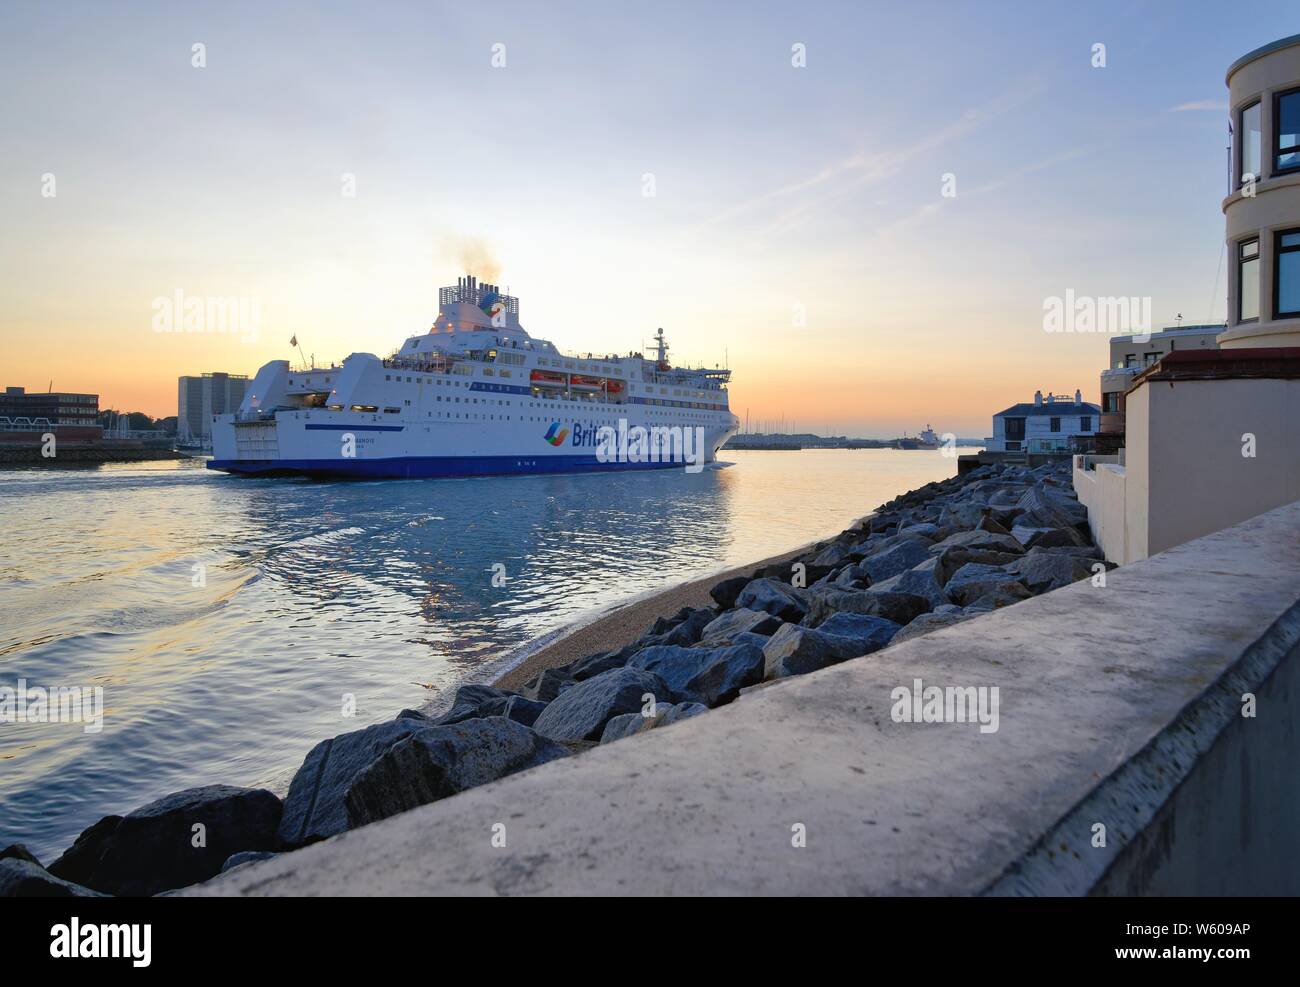 The Brittany Ferries boat Normandie passenger and car ferry sailing into Portsmouth harbour oat dusk, Hampshire England UK Stock Photo